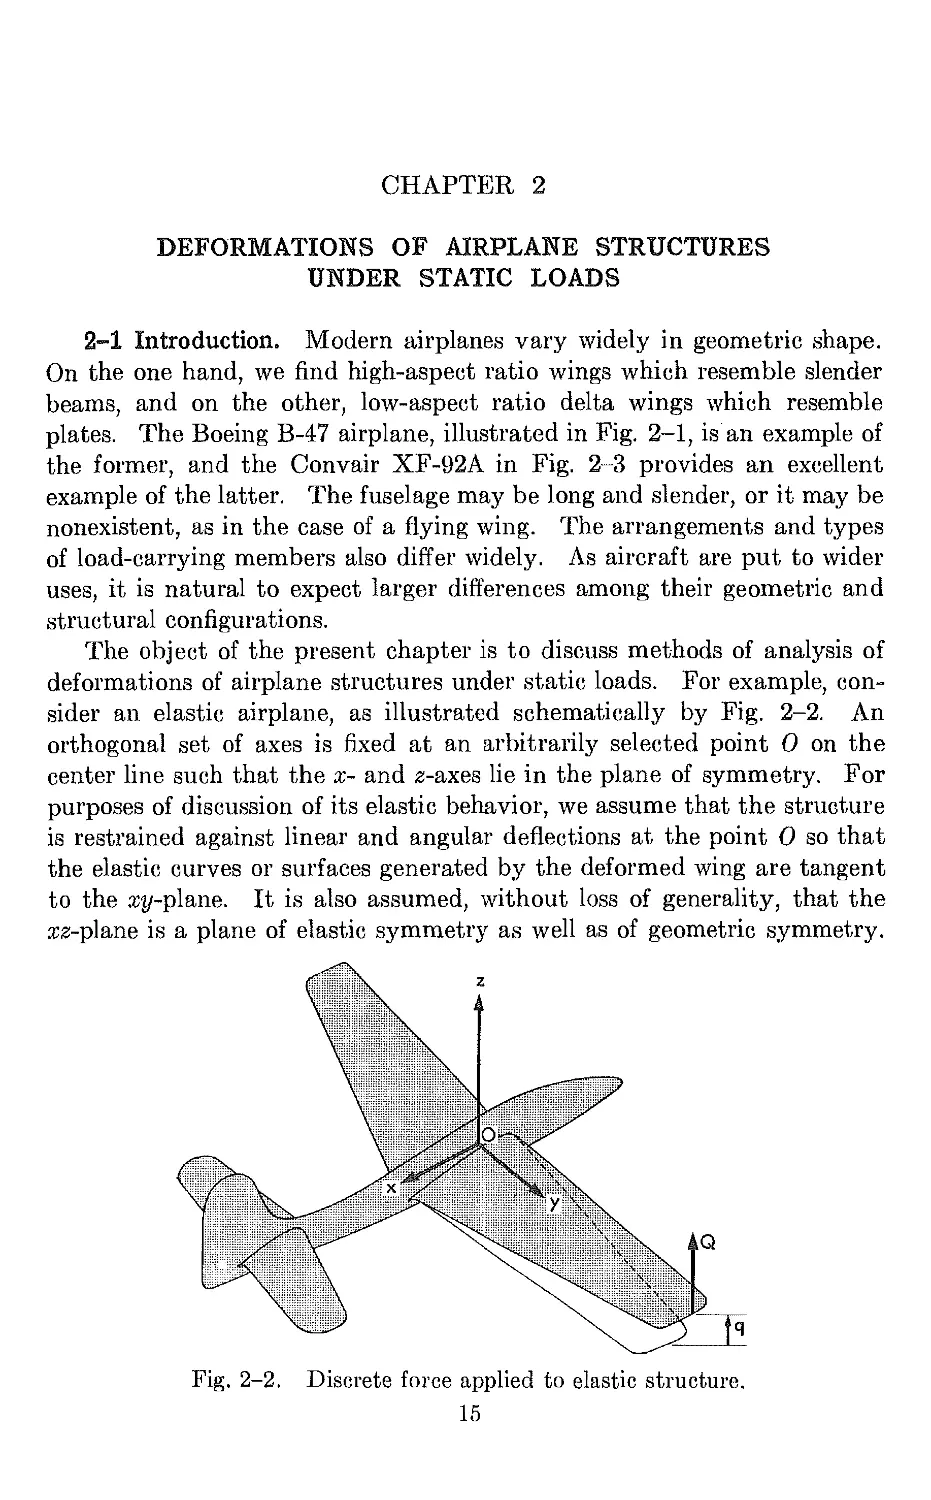 Chapter 2. Deformations of Airplane Structures Under Static Loads